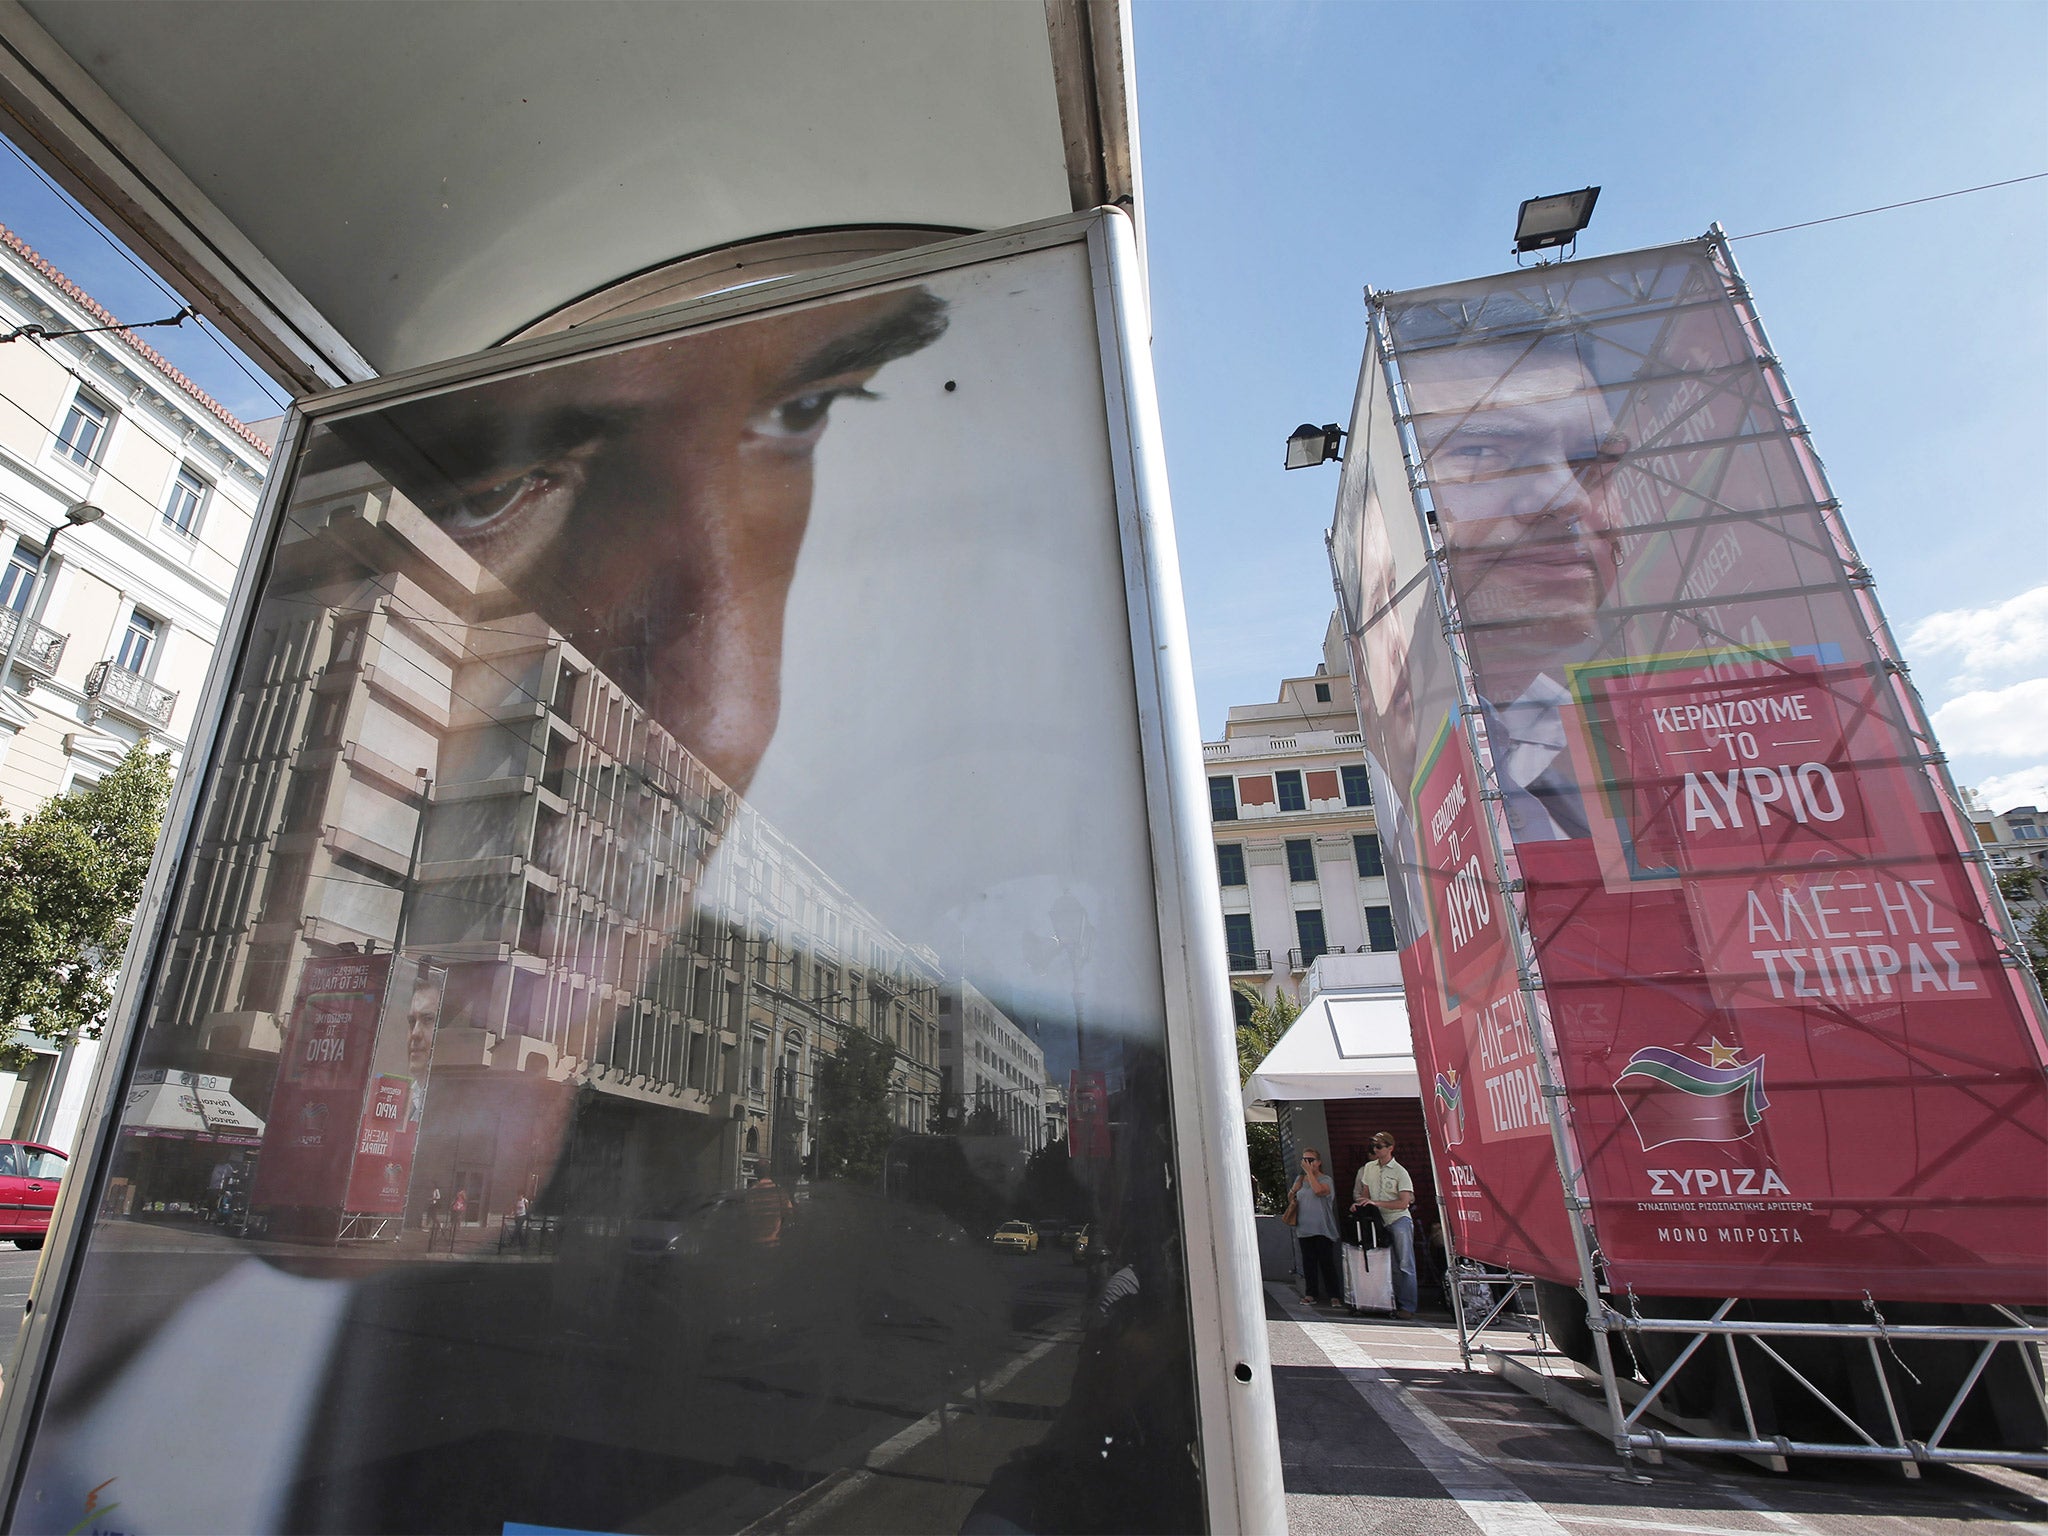 A bus stop poster depicting Vangelis Meimarakis, left, is seen backdropped by a banner, right, in support of Alexis Tsipras, in central Athens